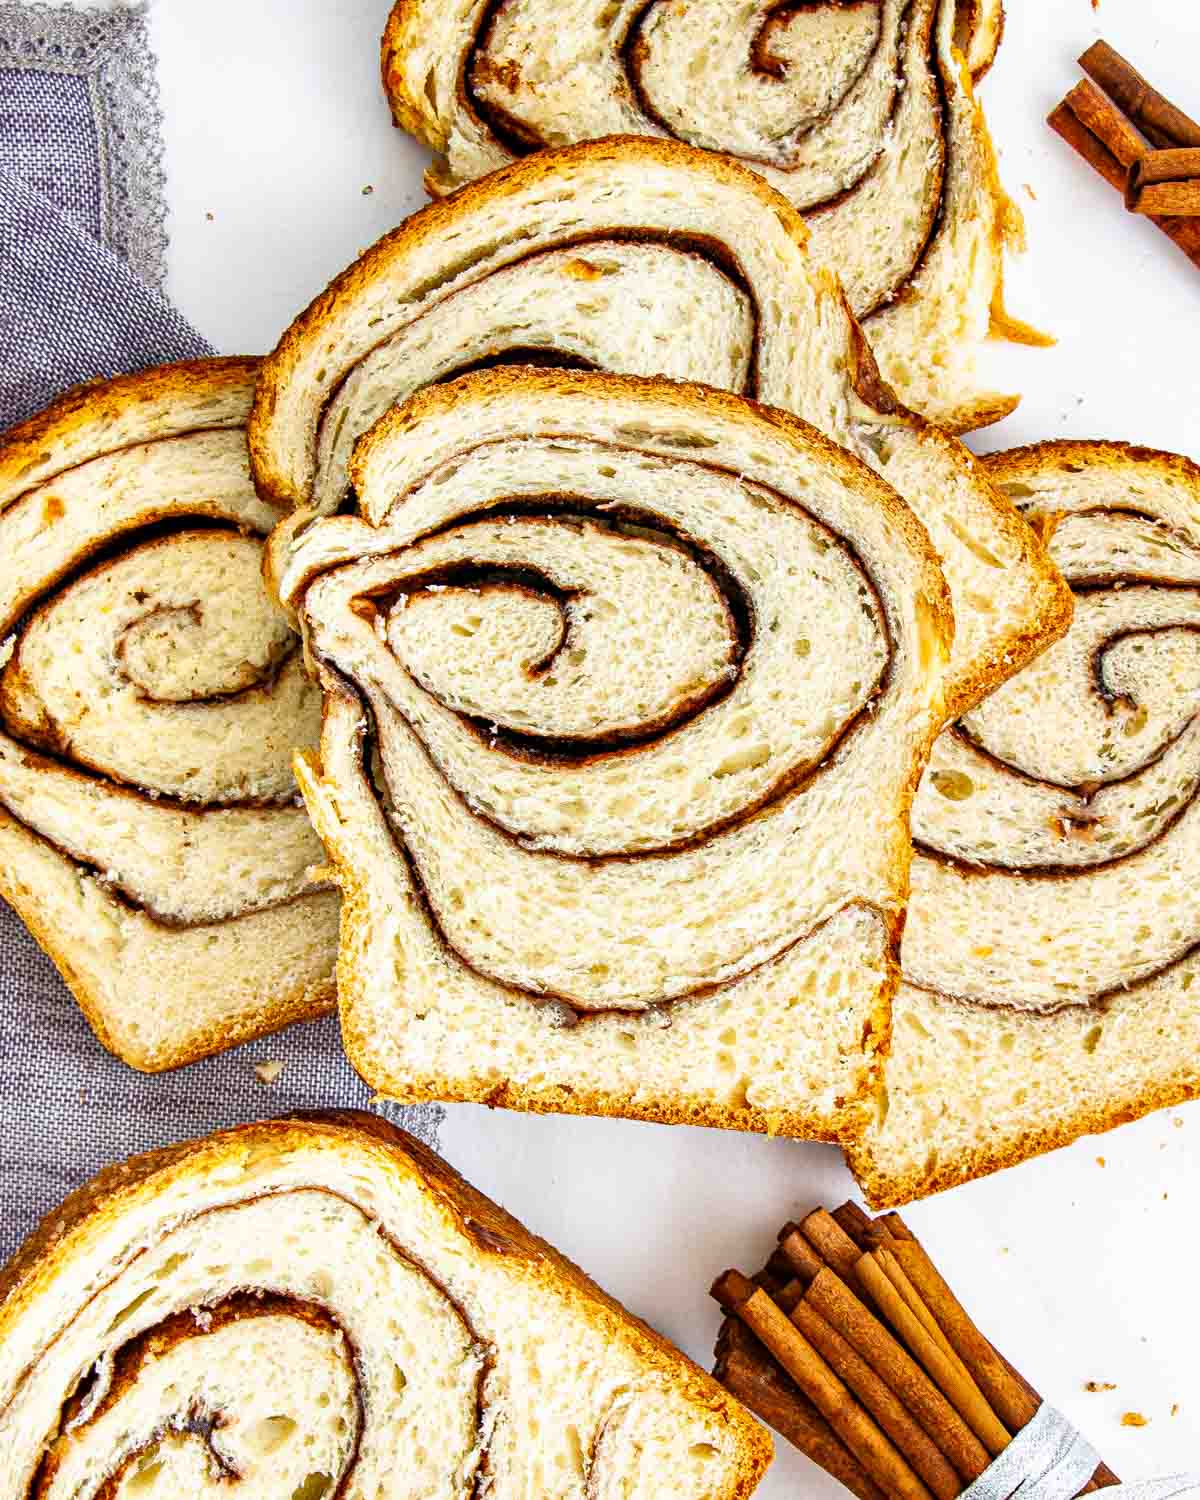 a few slices of freshly baked cinnamon bread next to a couple cinnamon sticks.